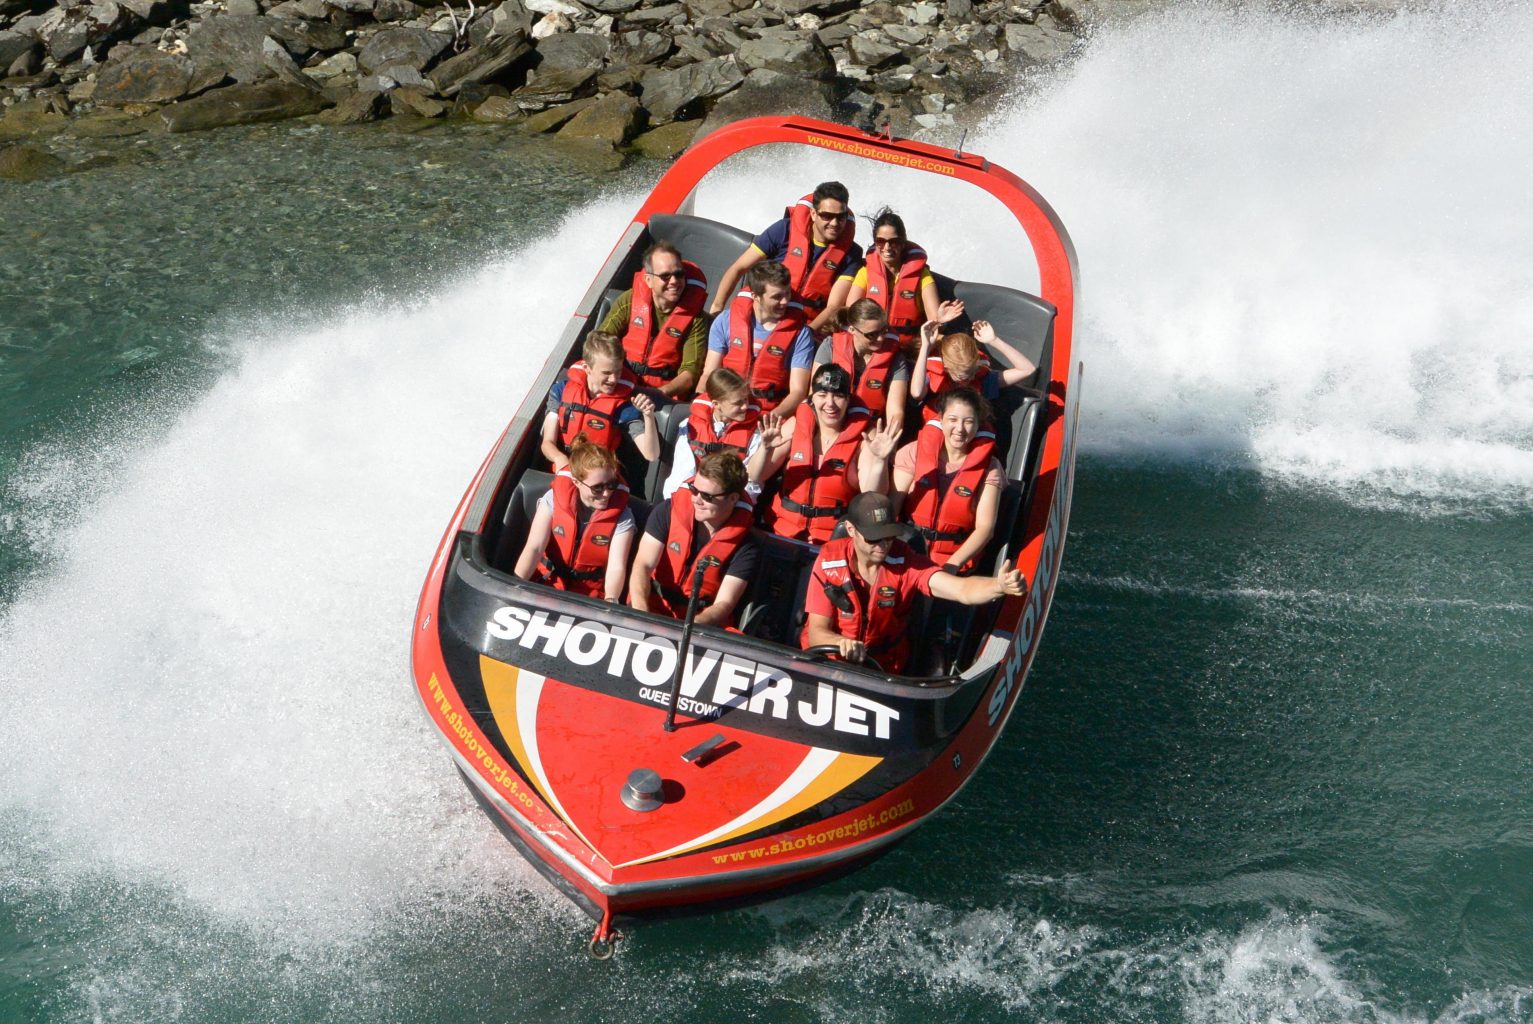 Craze family in the second and third rows of the jet boat during one of its 360 degree spins.